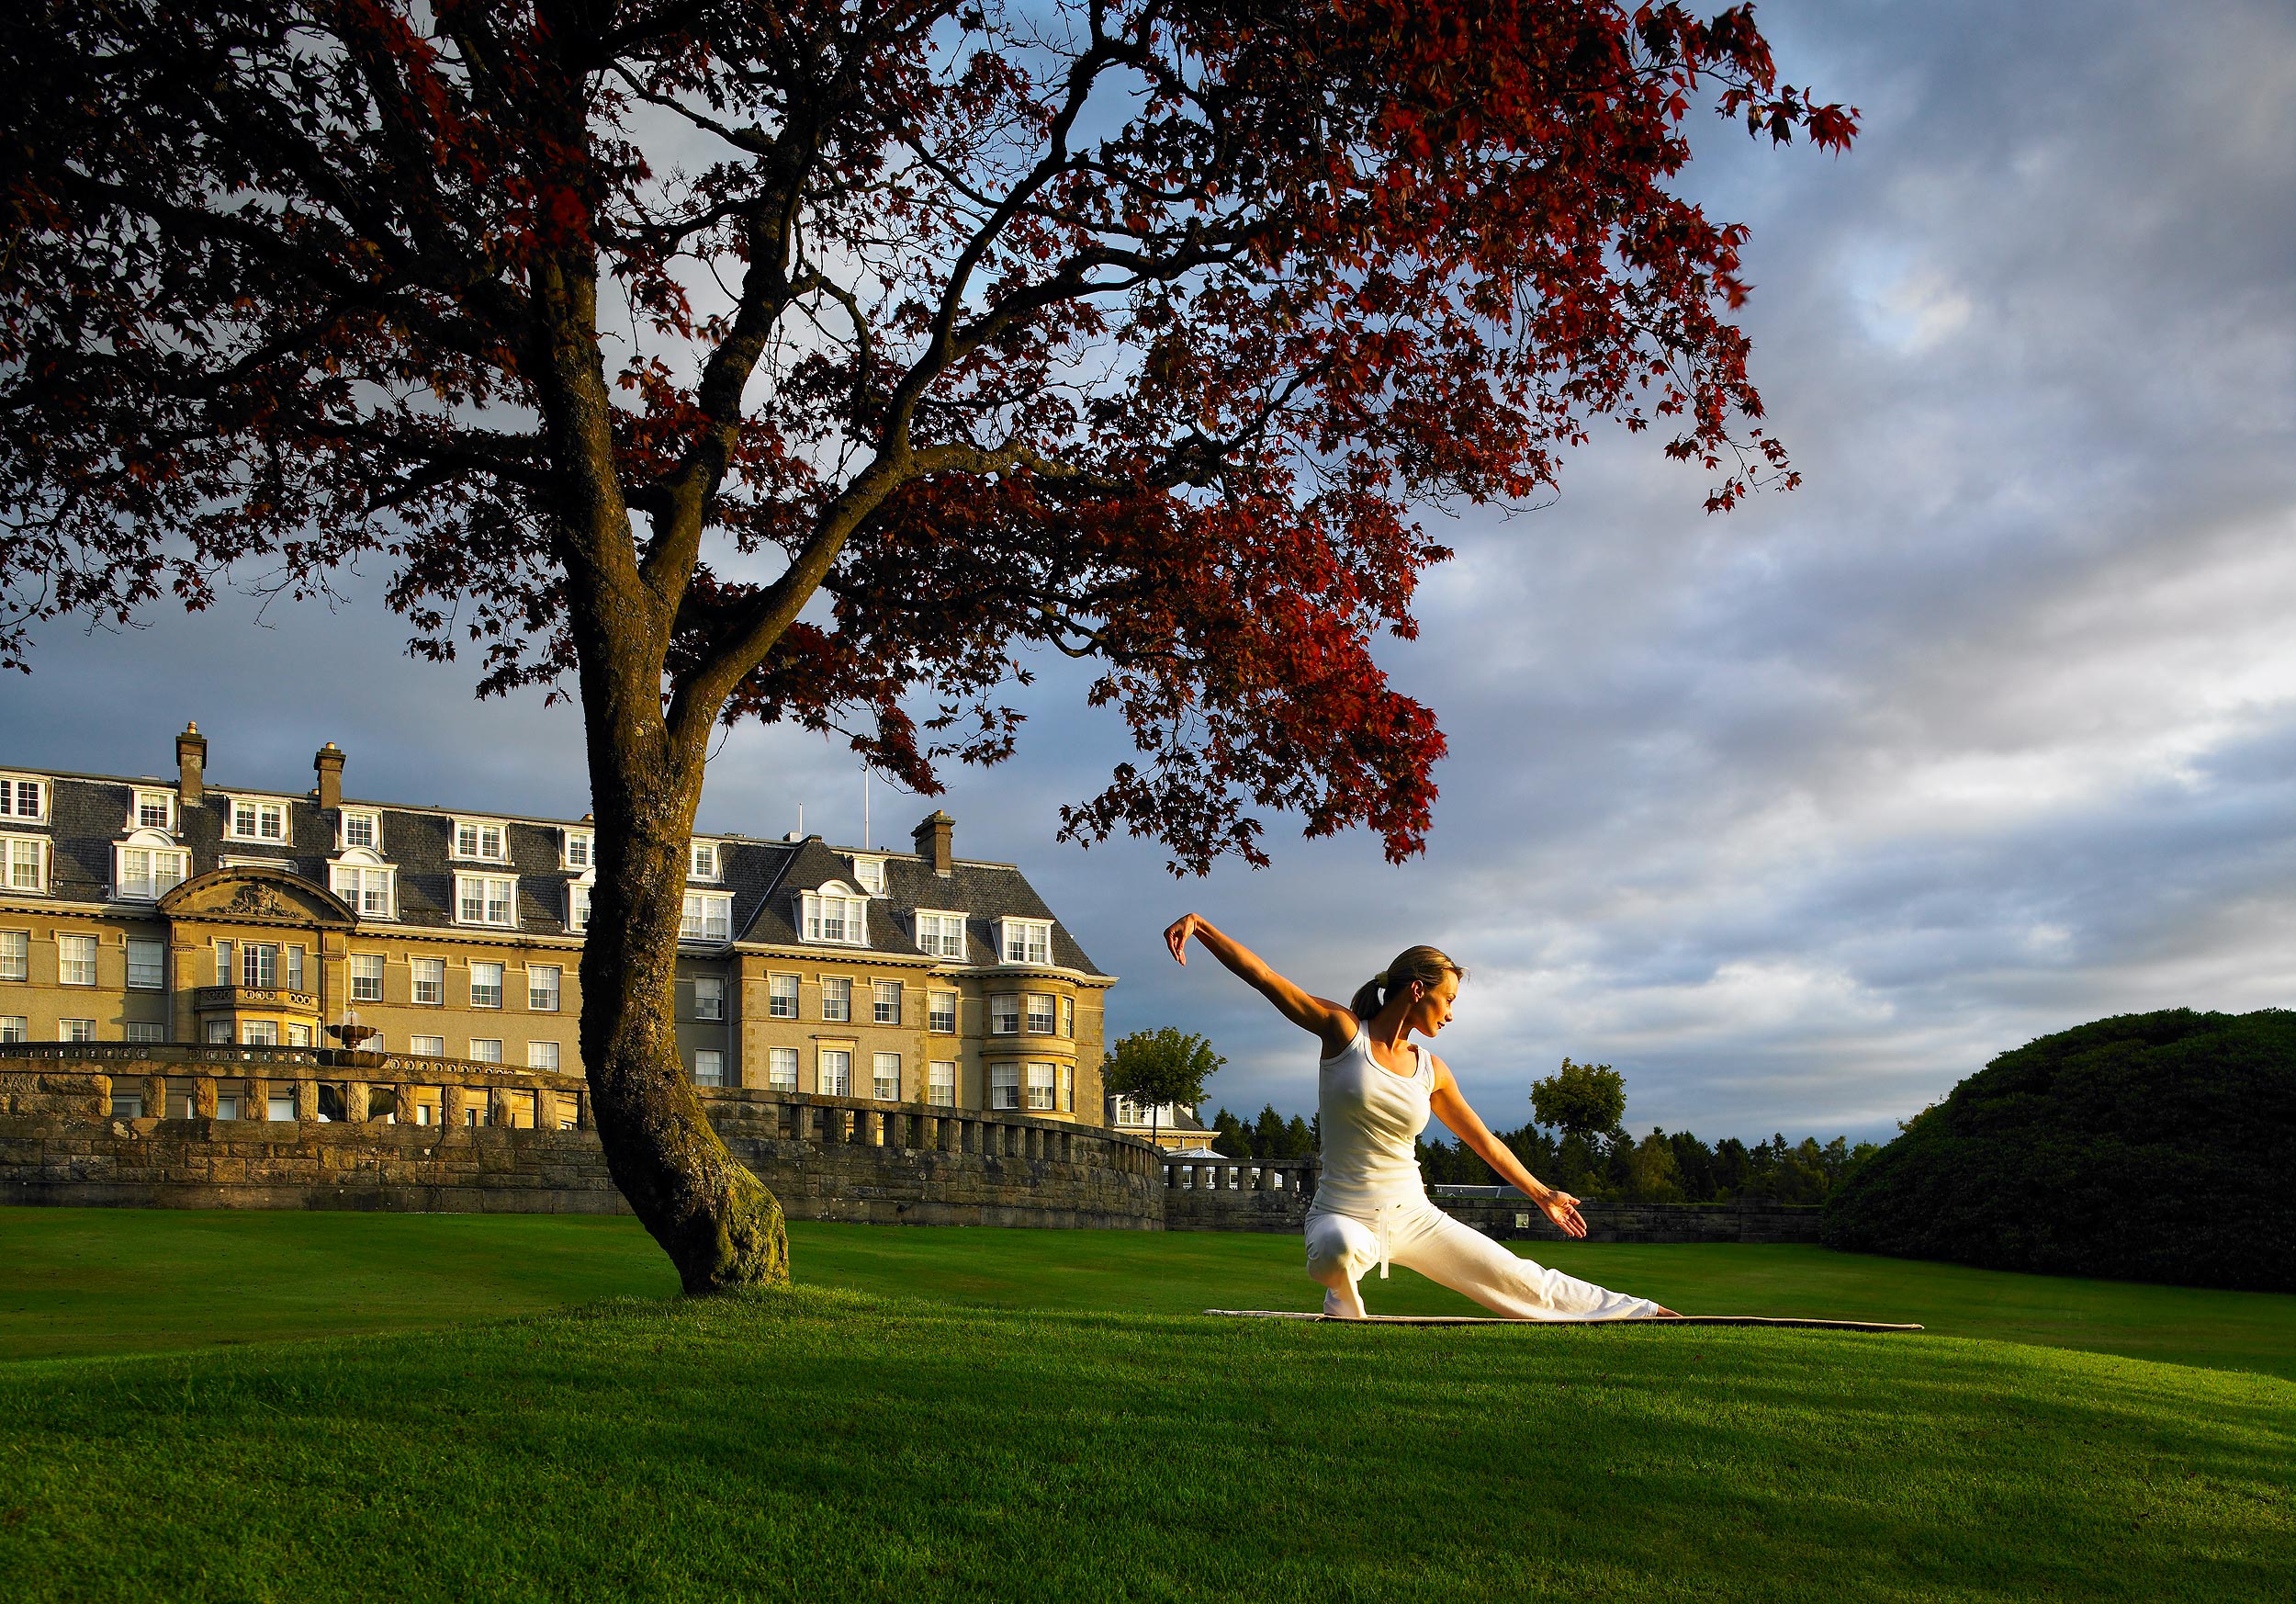 Tai Chi at Gleneagles hotel, Scotland.  Resort photography by Mike Caldwell